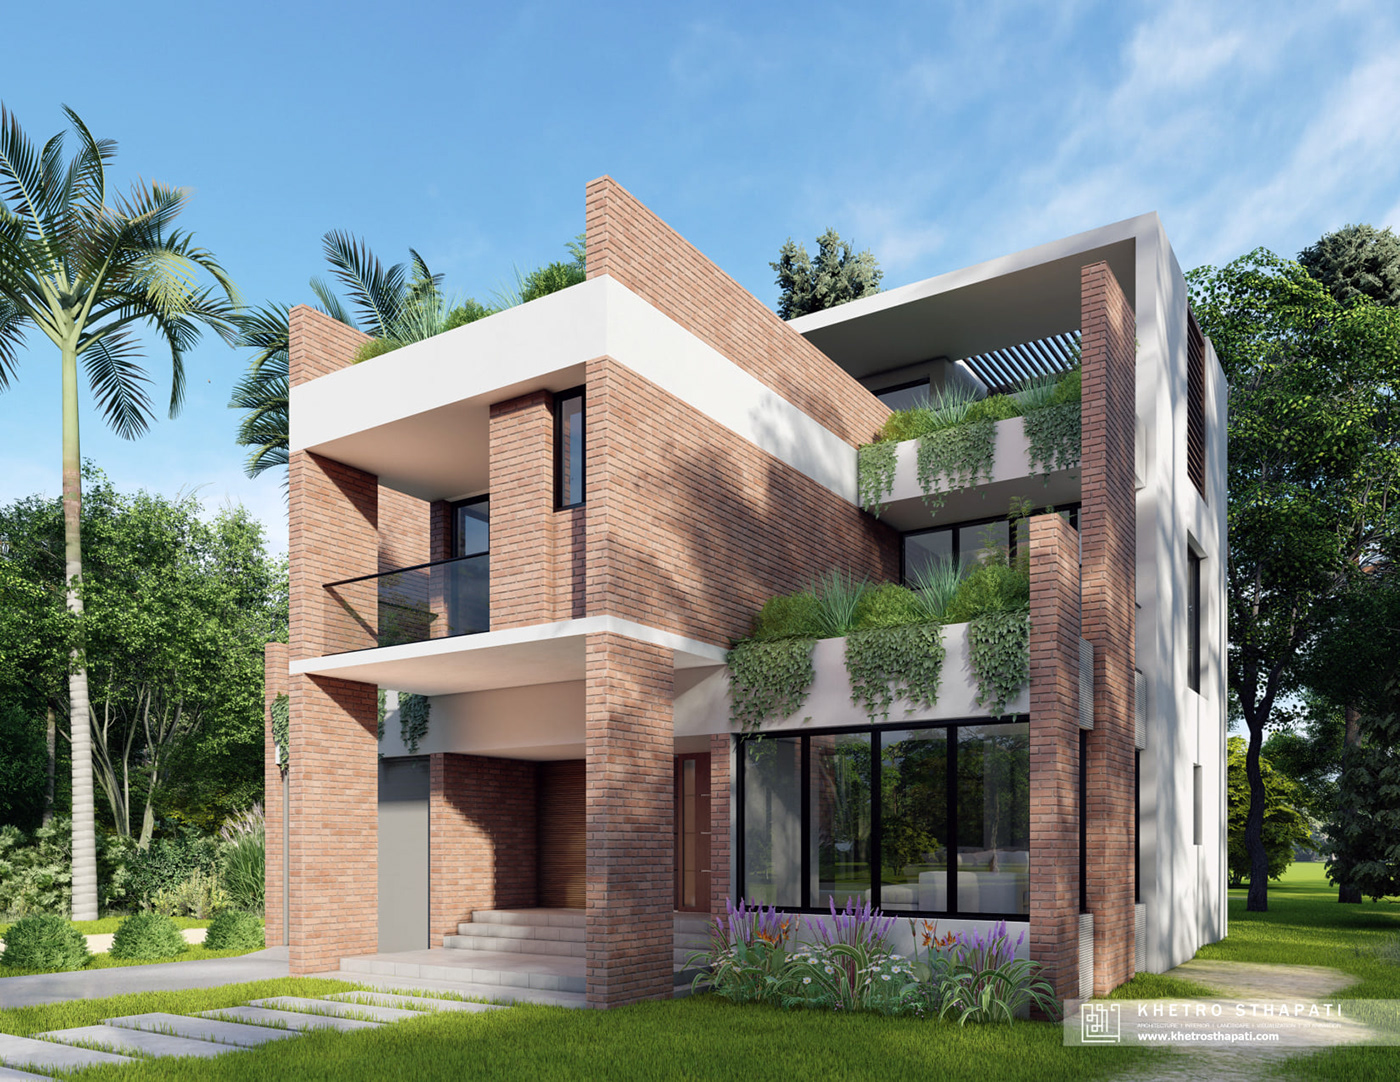 3ds max architecture exterior realestate Render Residential Design visualization